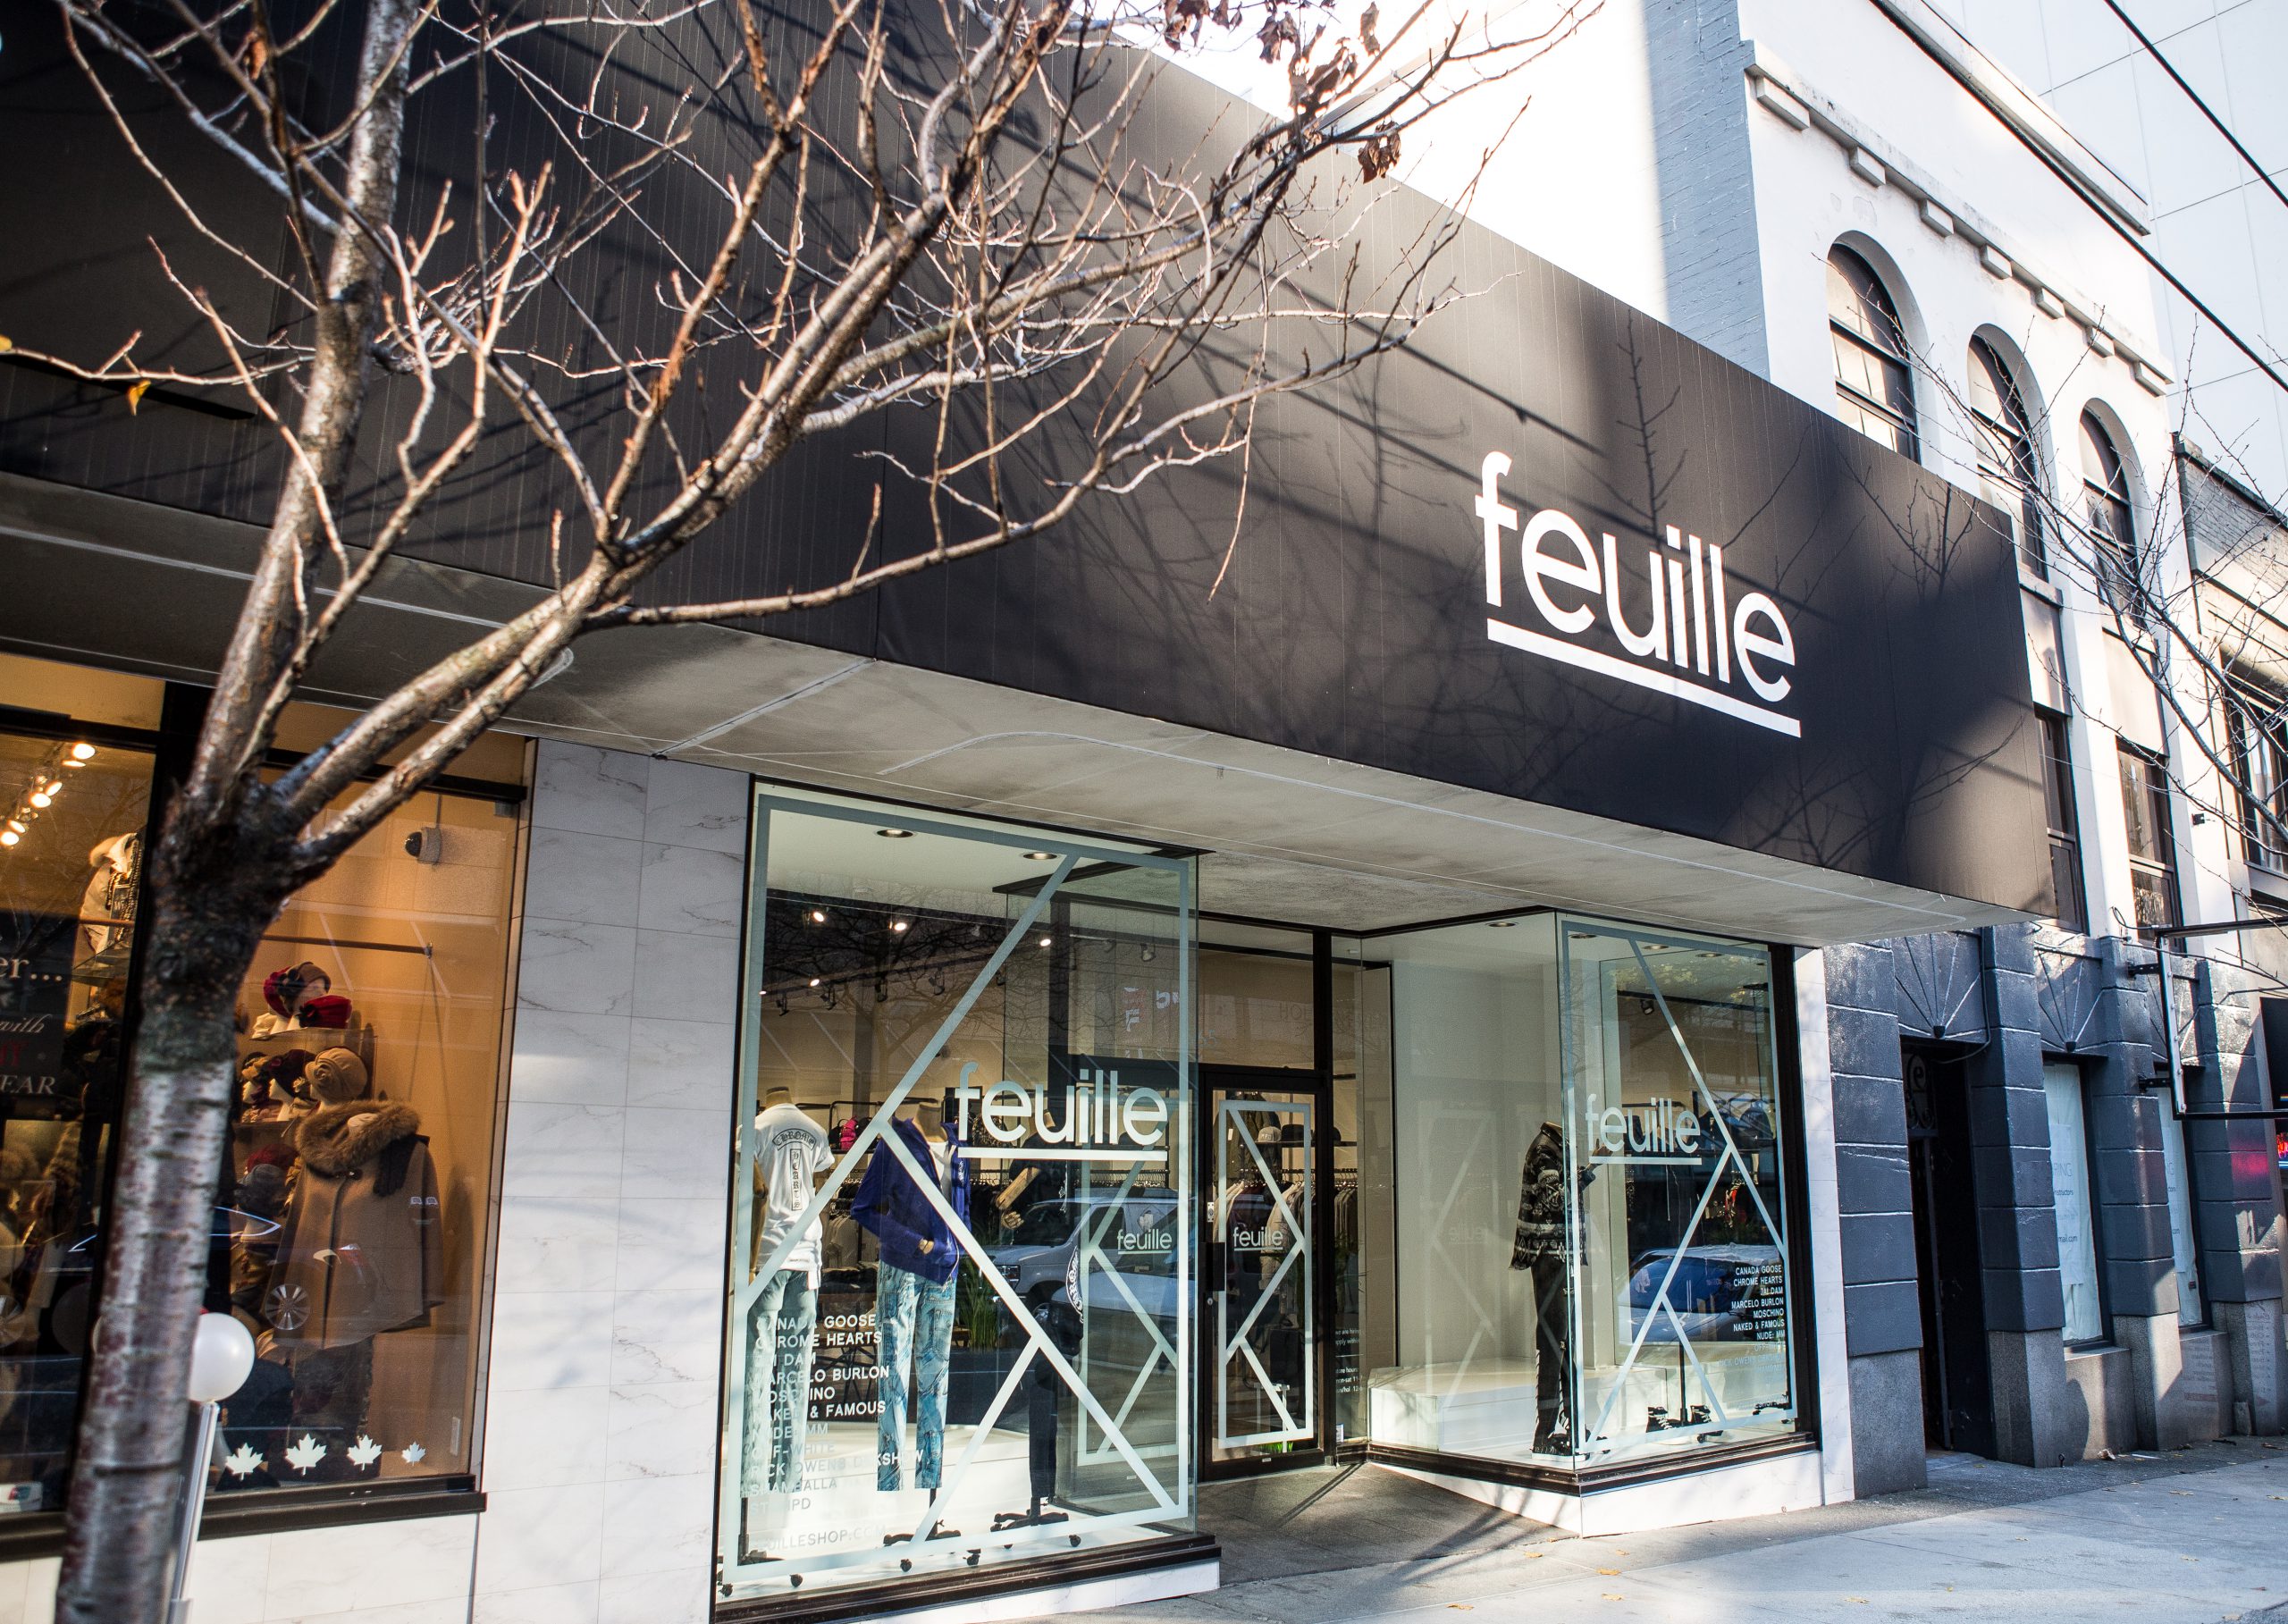 , , Feuille in Vancouver BC, by Cutler